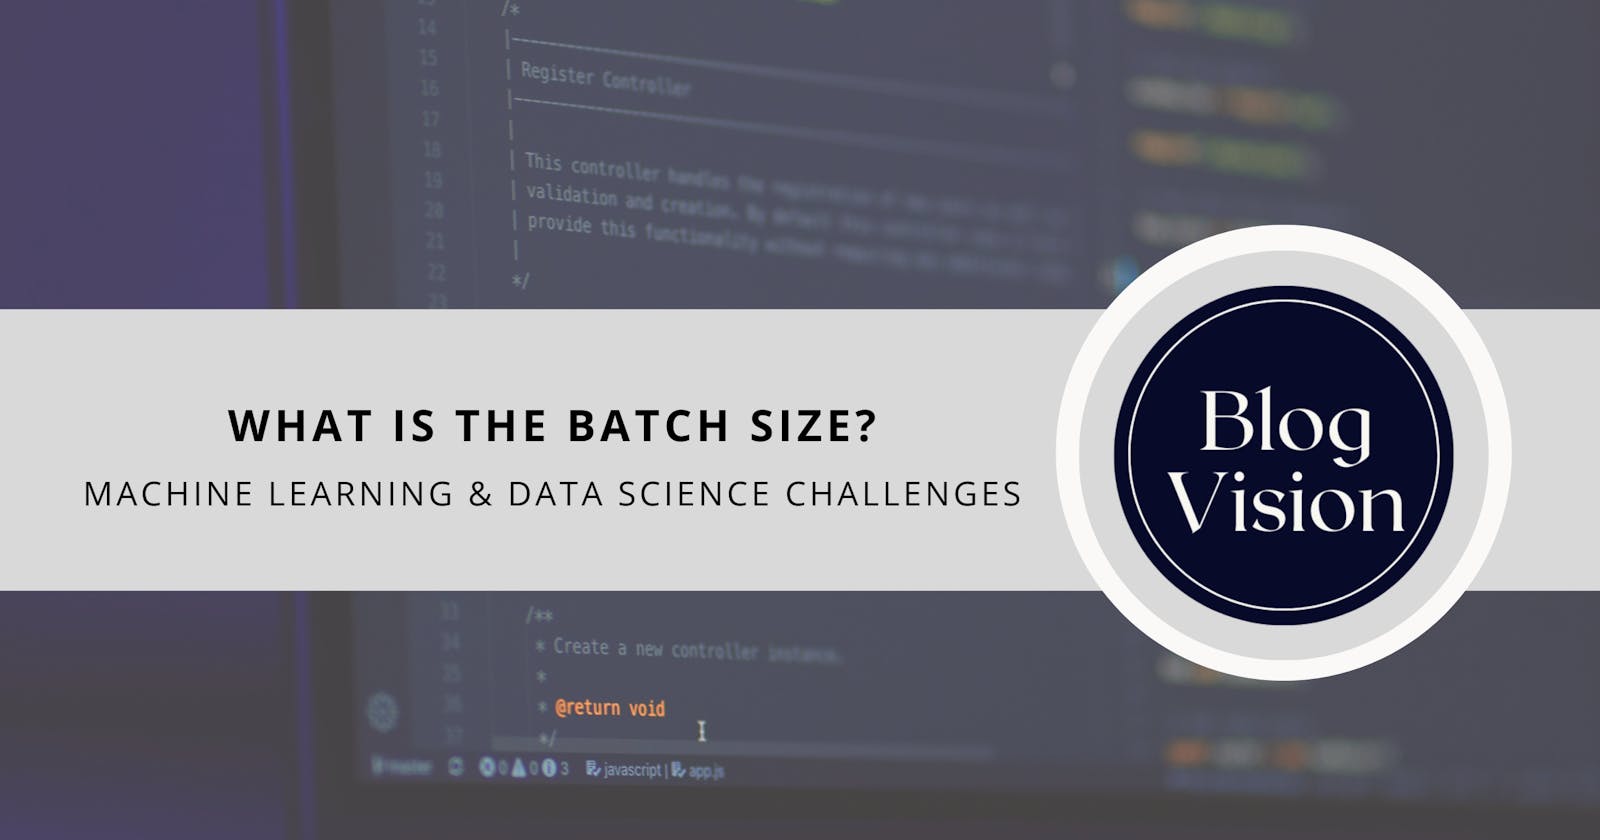 #69 Machine Learning & Data Science Challenge 69